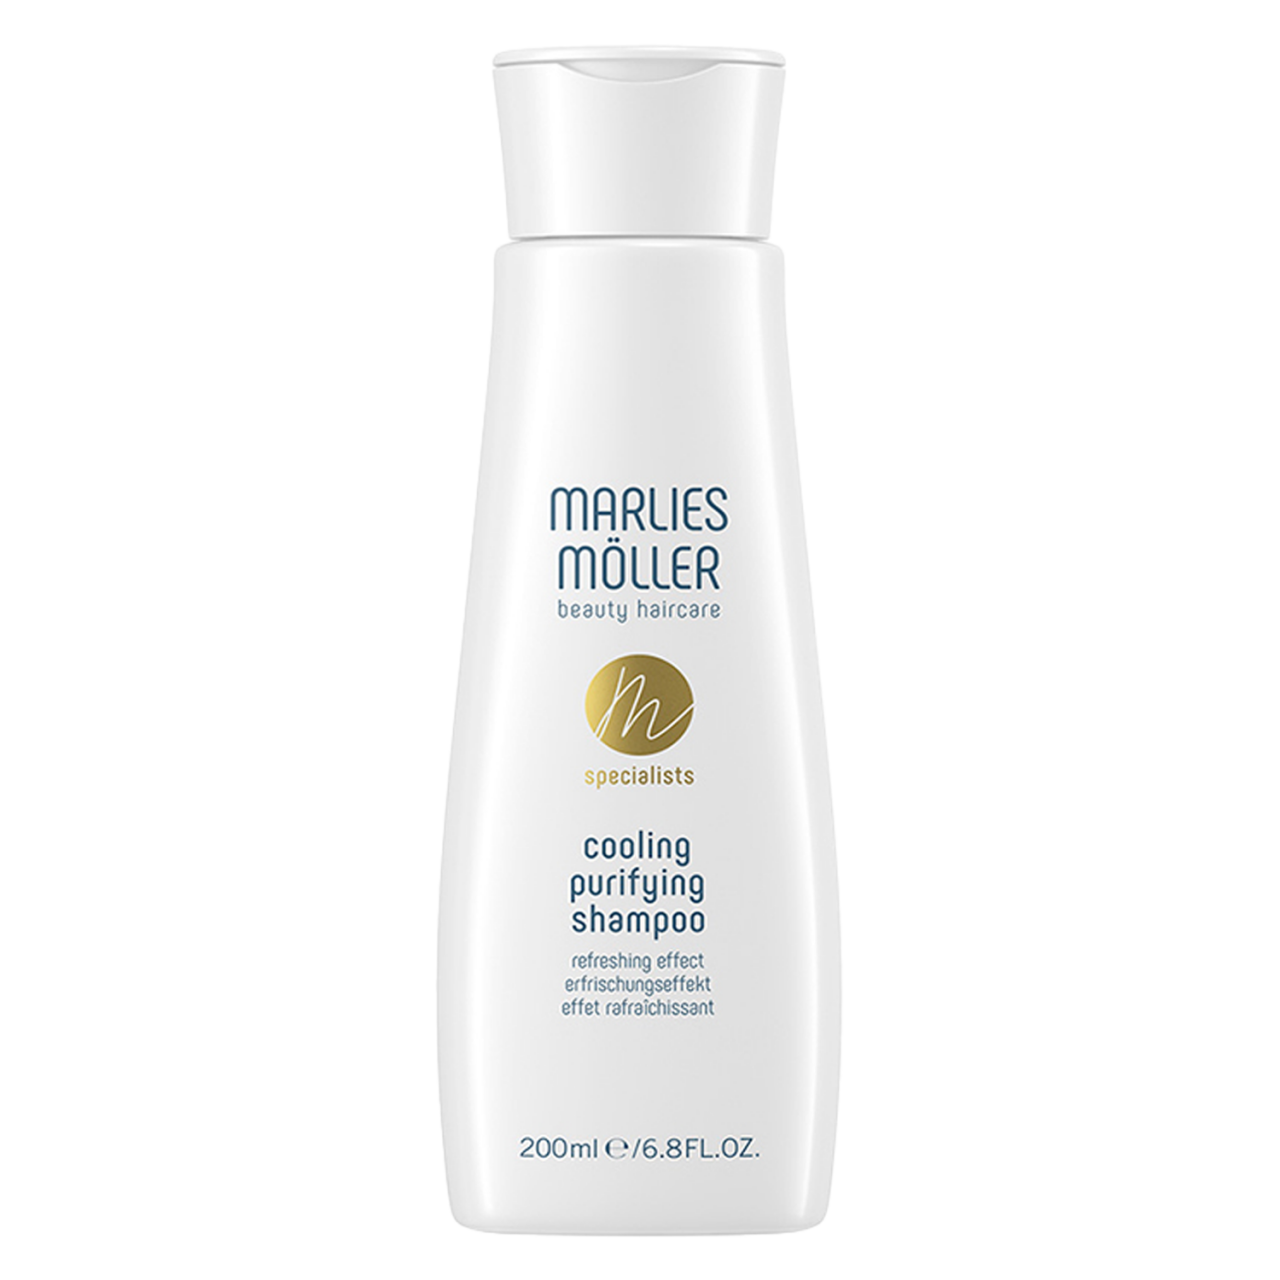 MM Specialists - Cooling Purifying Shampoo von Marlies Möller